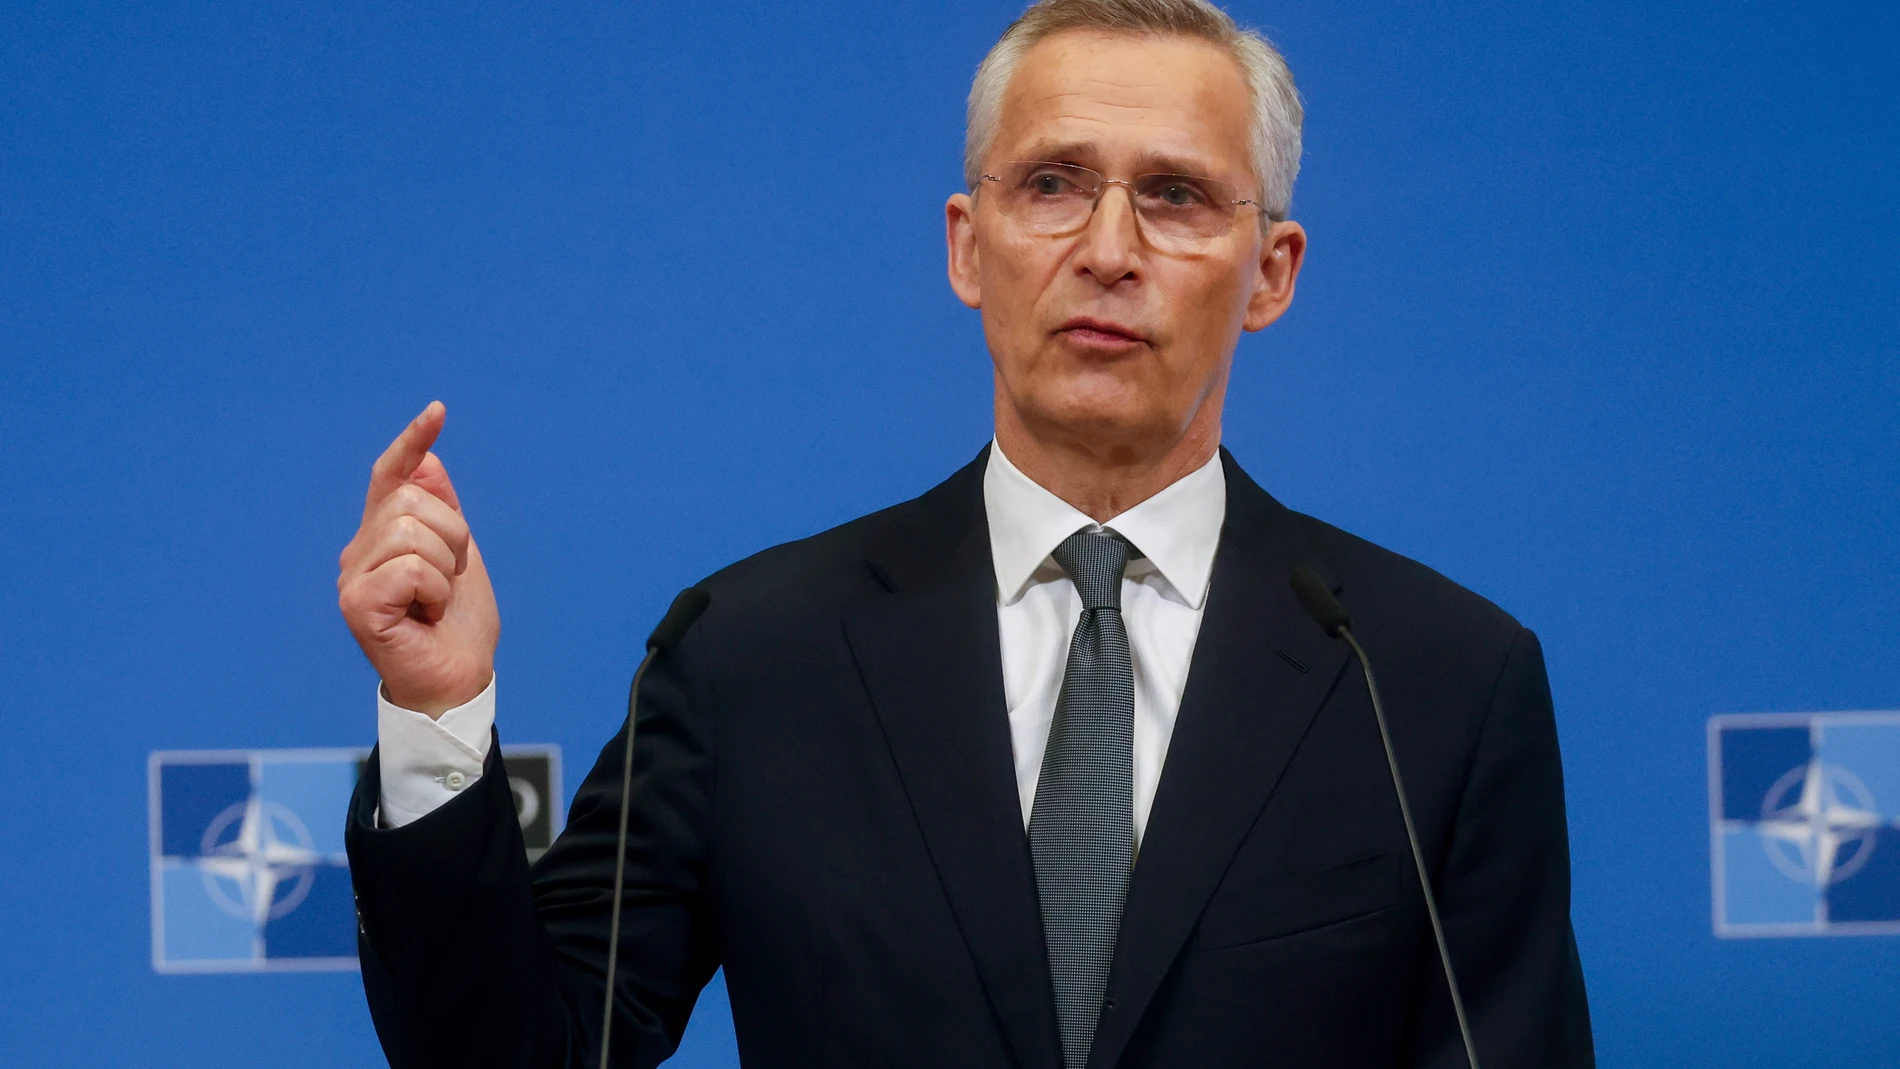 Brussels (Belgium), 14/03/2024.- NATO Secretary General Jens Stoltenberg gestures during a press conference to present his annual report for 2023 at NATO headquarters in Brussels, Belgium, 14 March 2024. (Bélgica, Bruselas) EFE/EPA/OLIVIER HOSLET